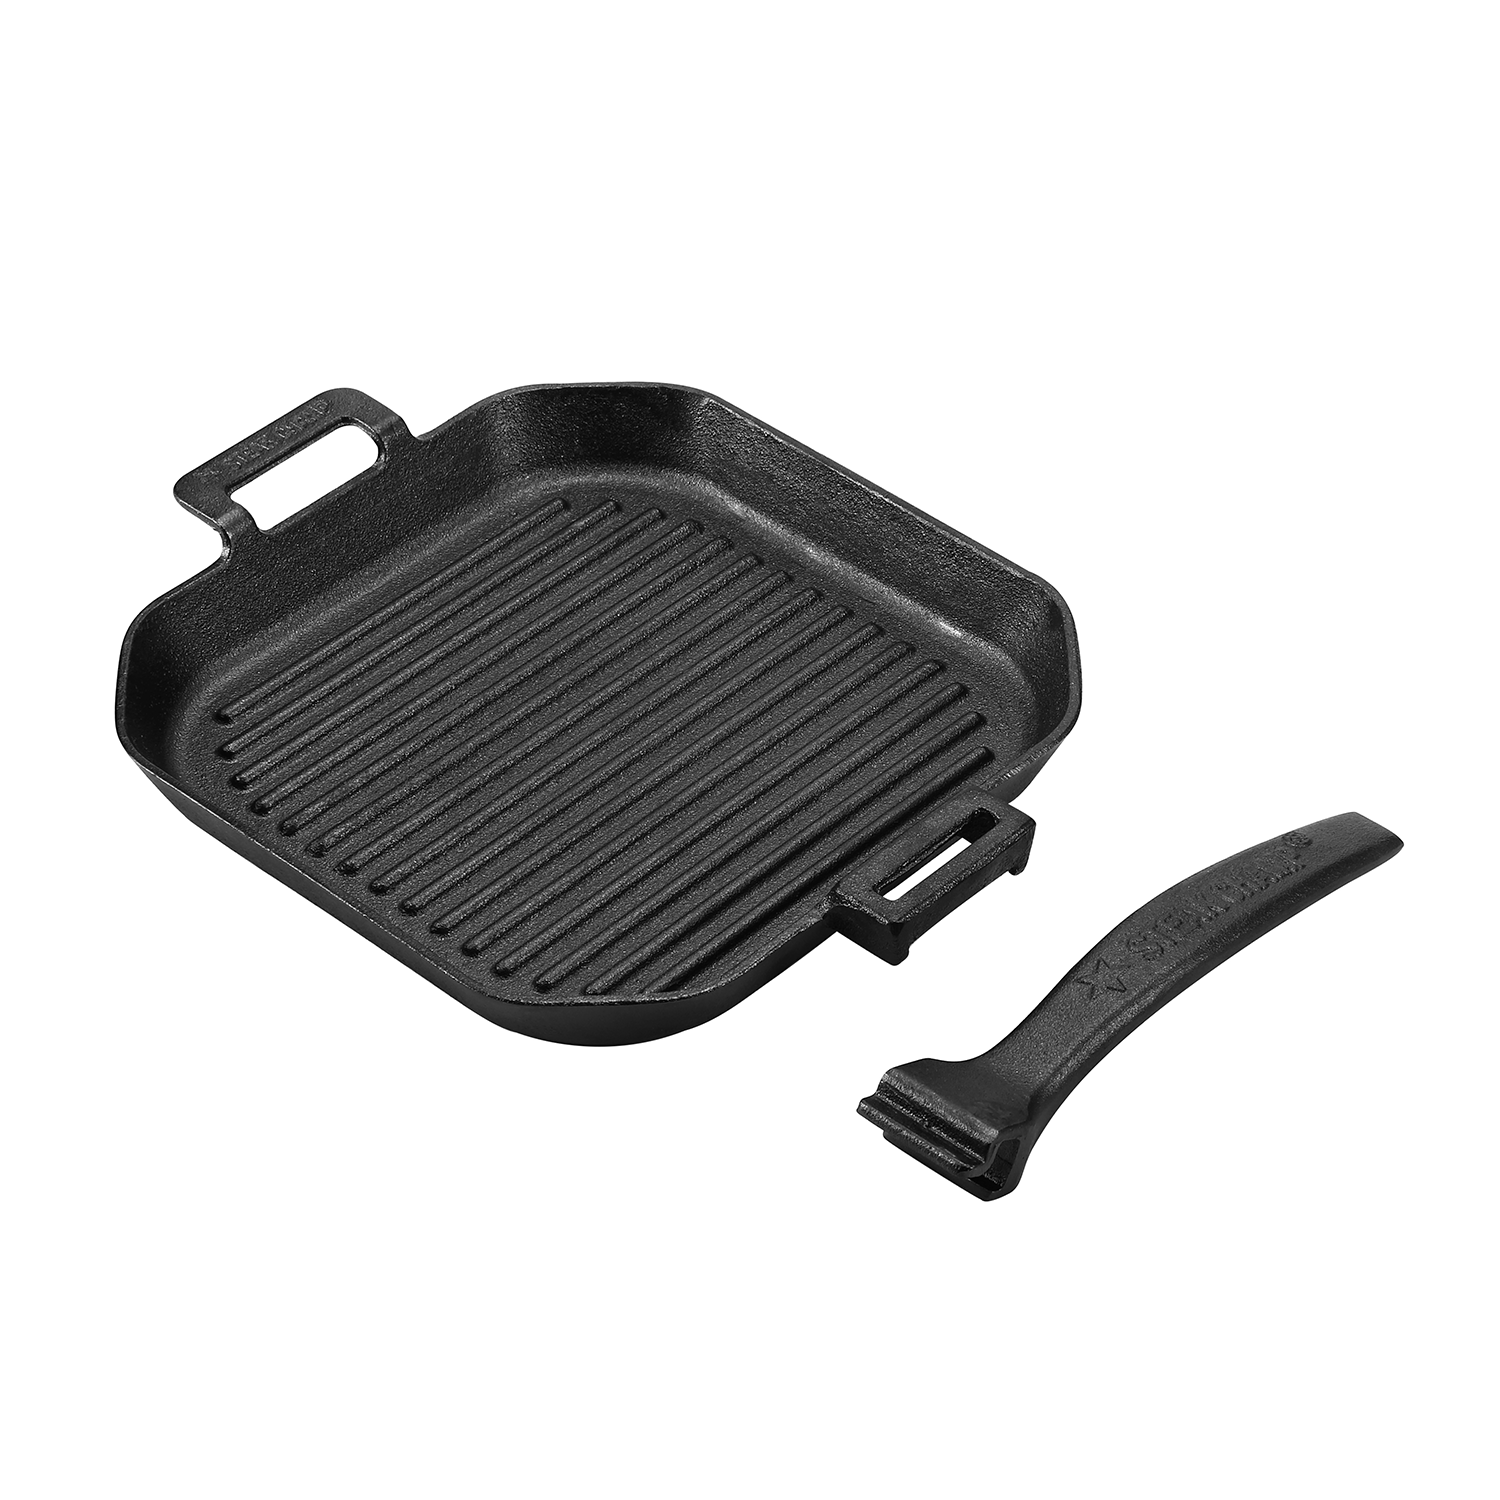  Cast Iron Grilling Pan 10 5010 